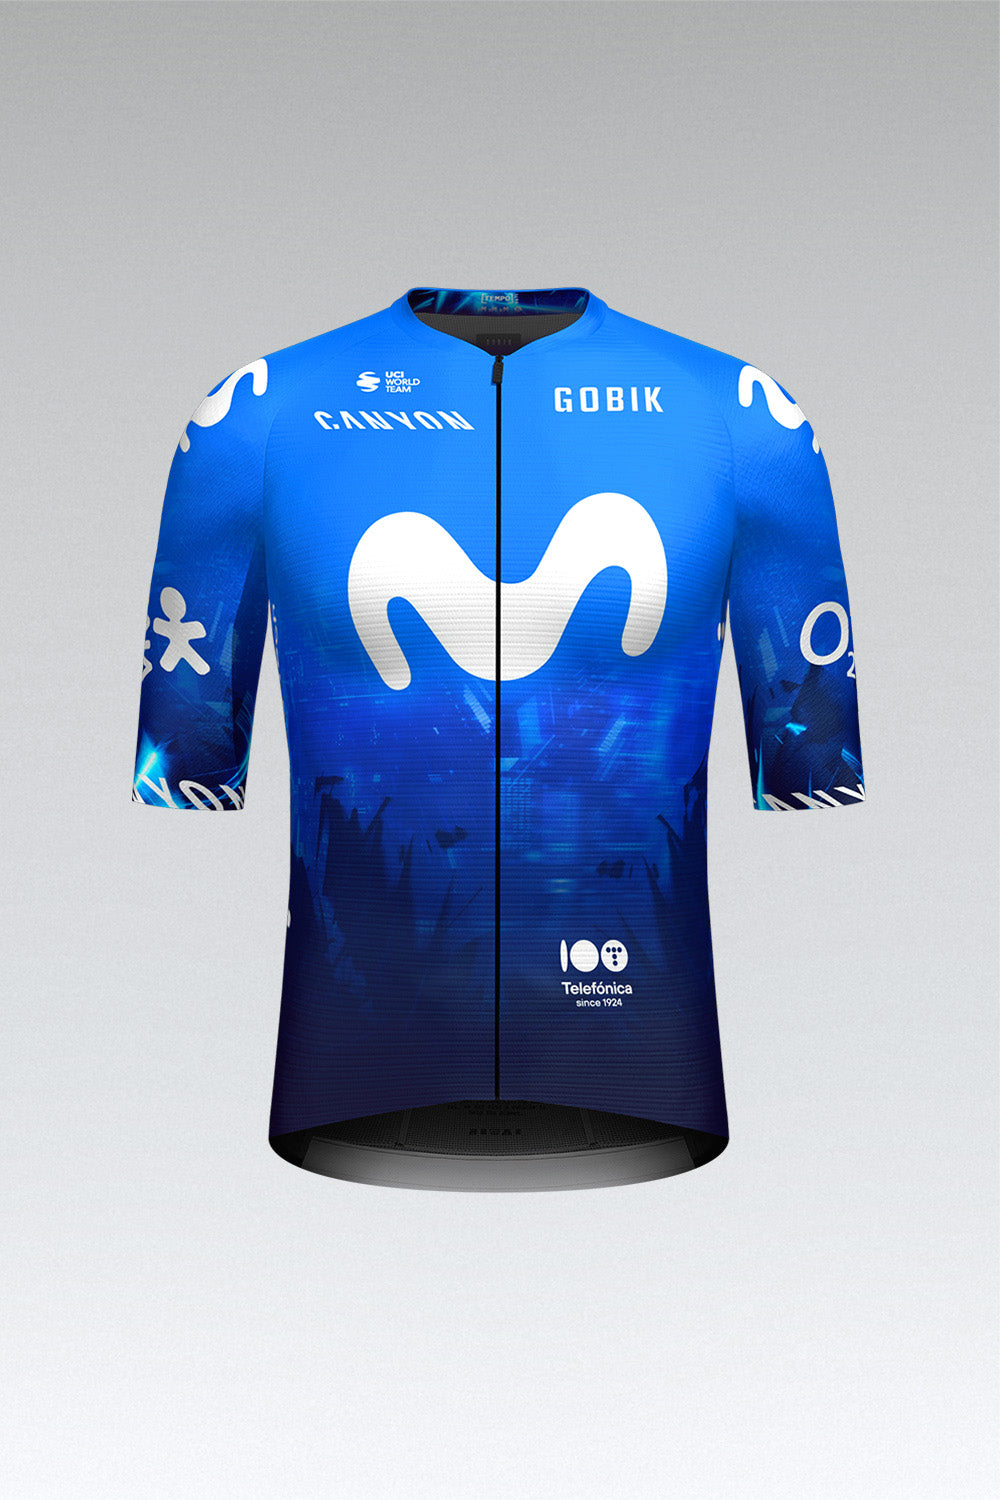 MAILLOT À MANCHES COURTES INFINITY HOMME MOVISTAR TEAM 24